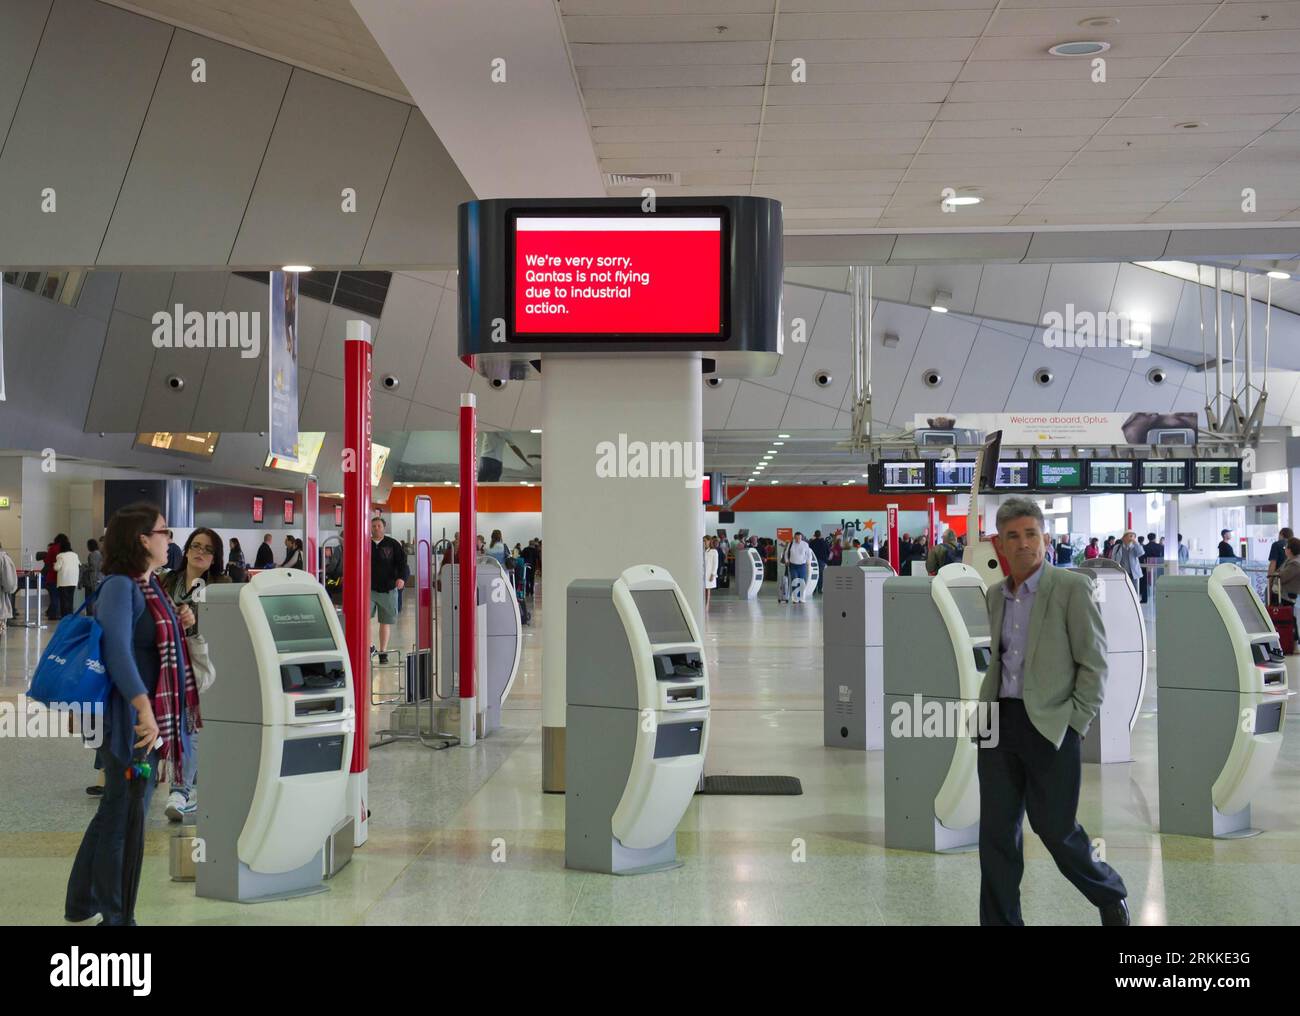 Bildnummer: 56228868  Datum: 30.10.2011  Copyright: imago/Xinhua (111030) -- MELBOURNE, Oct. 30, 2011 (Xinhua) -- Passengers hover around unavailable Qantas self-check machines at the airport in Melbourne, Australia, Oct. 30, 2011. Australia s largest airline company Qantas on Saturday made a sudden announcement to ground its entire flights and locking out its staff due to pay and job security quarrel with the trade unions. (Xinhua/Bai Xue) (djj) AUSTRALIA-MELBOURNE-QANTAS PUBLICATIONxNOTxINxCHN Wirtschaft Verkehr Luftfahrt Streik Flugausfälle Grounding xjh x0x premiumd 2011 quer     56228868 Stock Photo